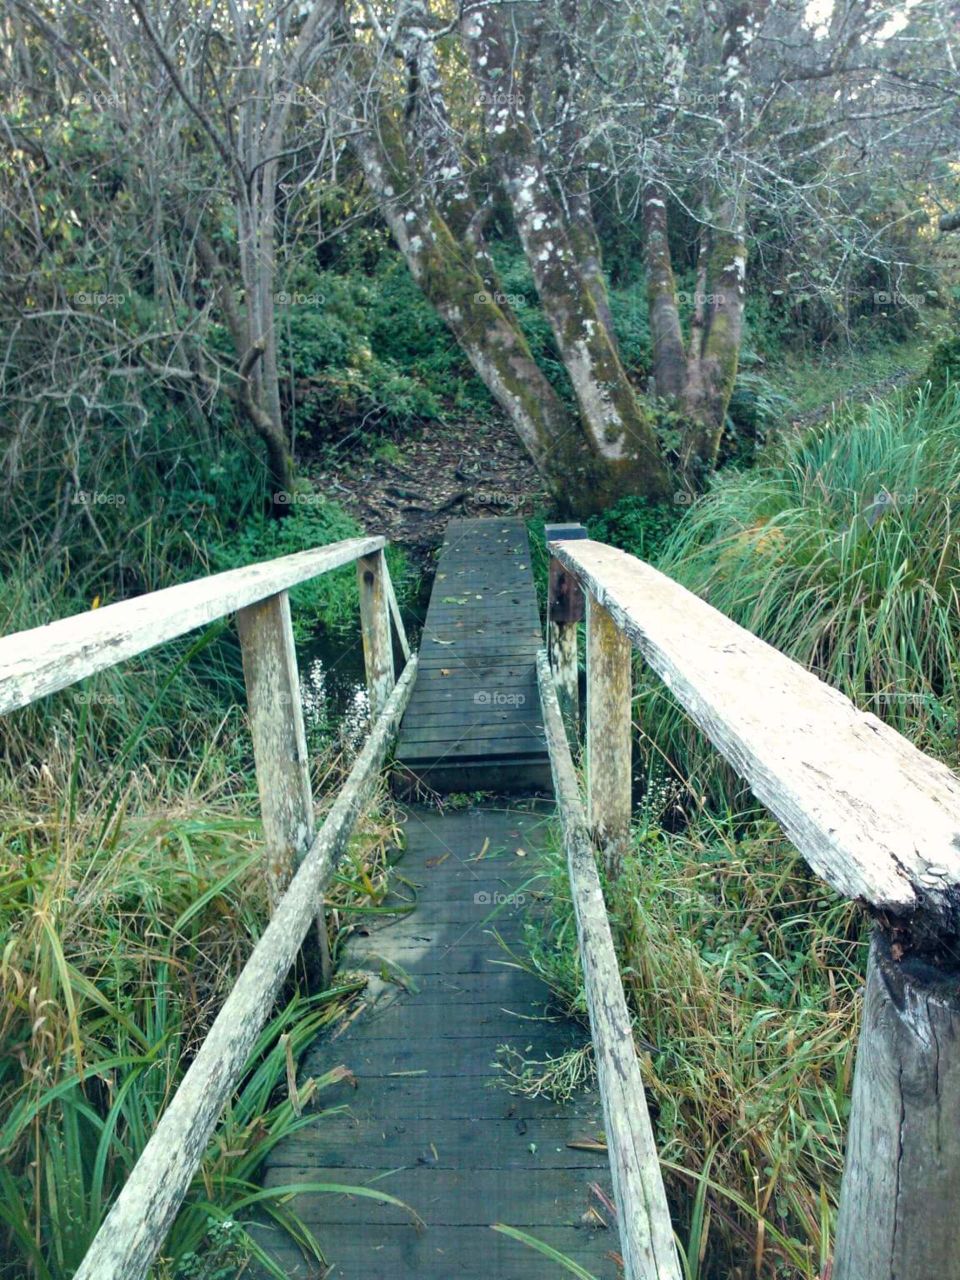 A gap in the bridge that is too big to step over but not big enough to hop over. So, we hopped (Fort Bragg, CA)